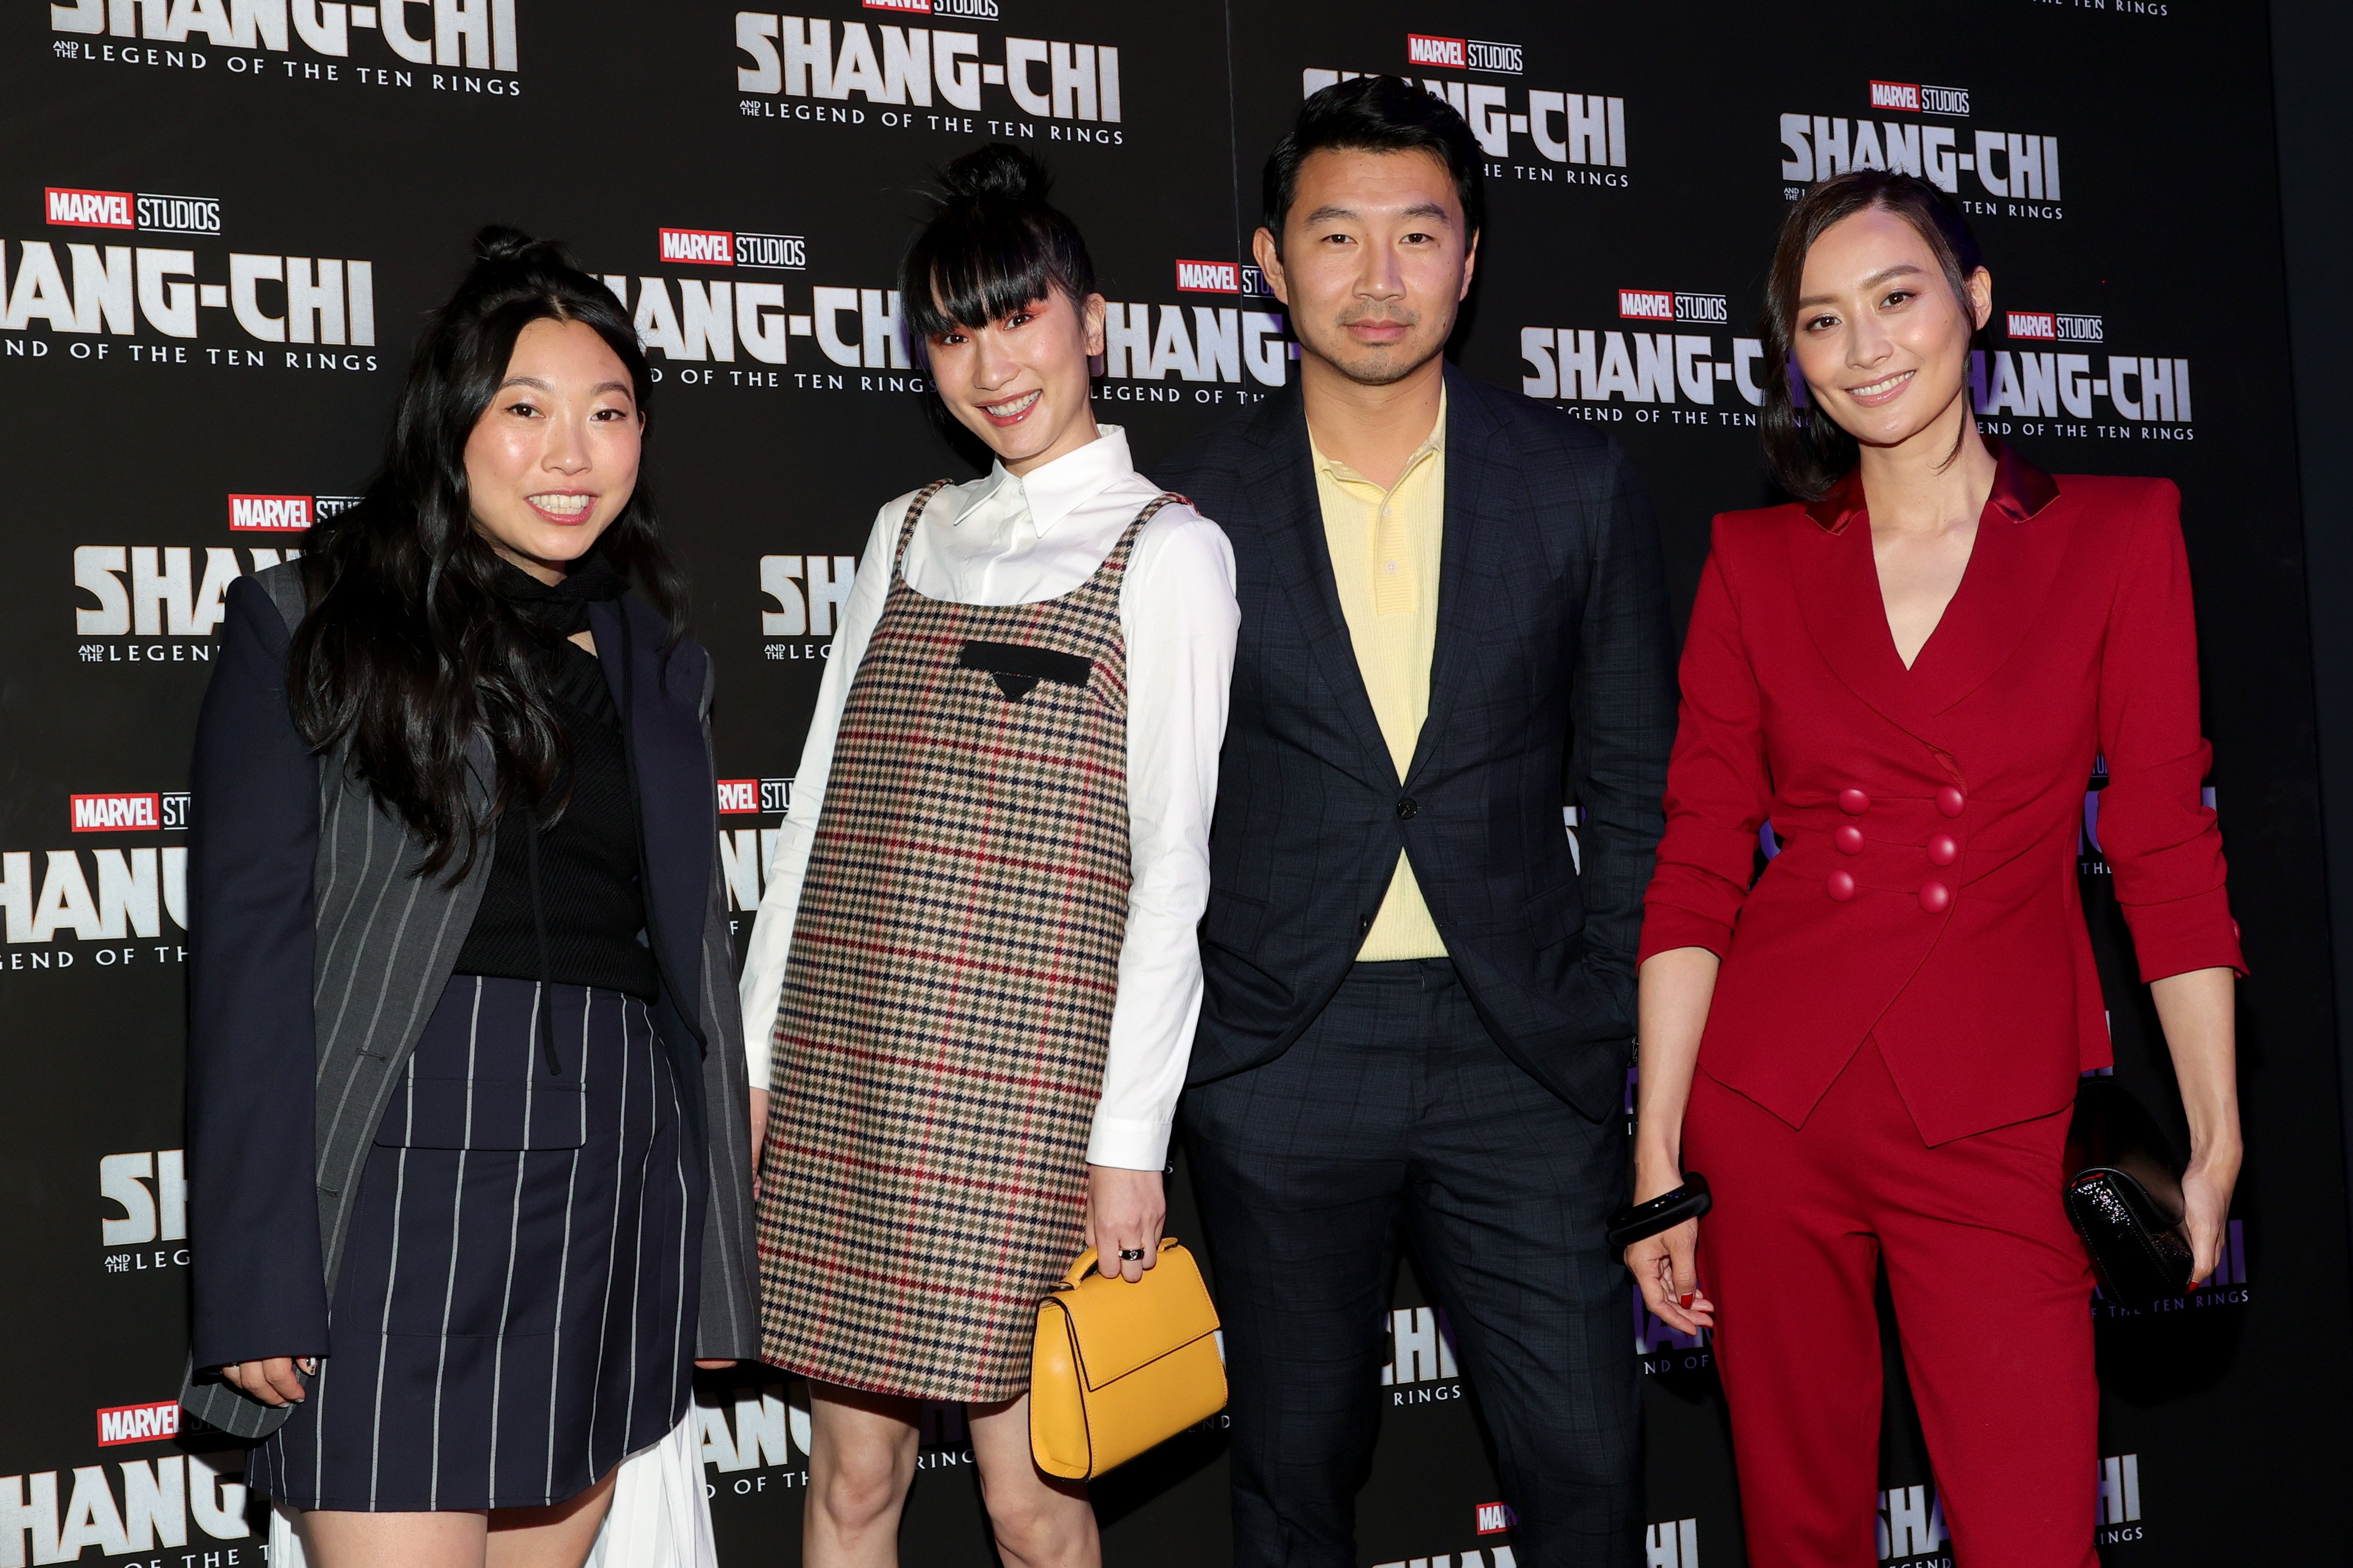 Awkwafina, Meng'er Zhang, Simu Liu, and Fala Chen attend the 'Shang-Chi And The Legend Of The Ten Rings' New York Screening